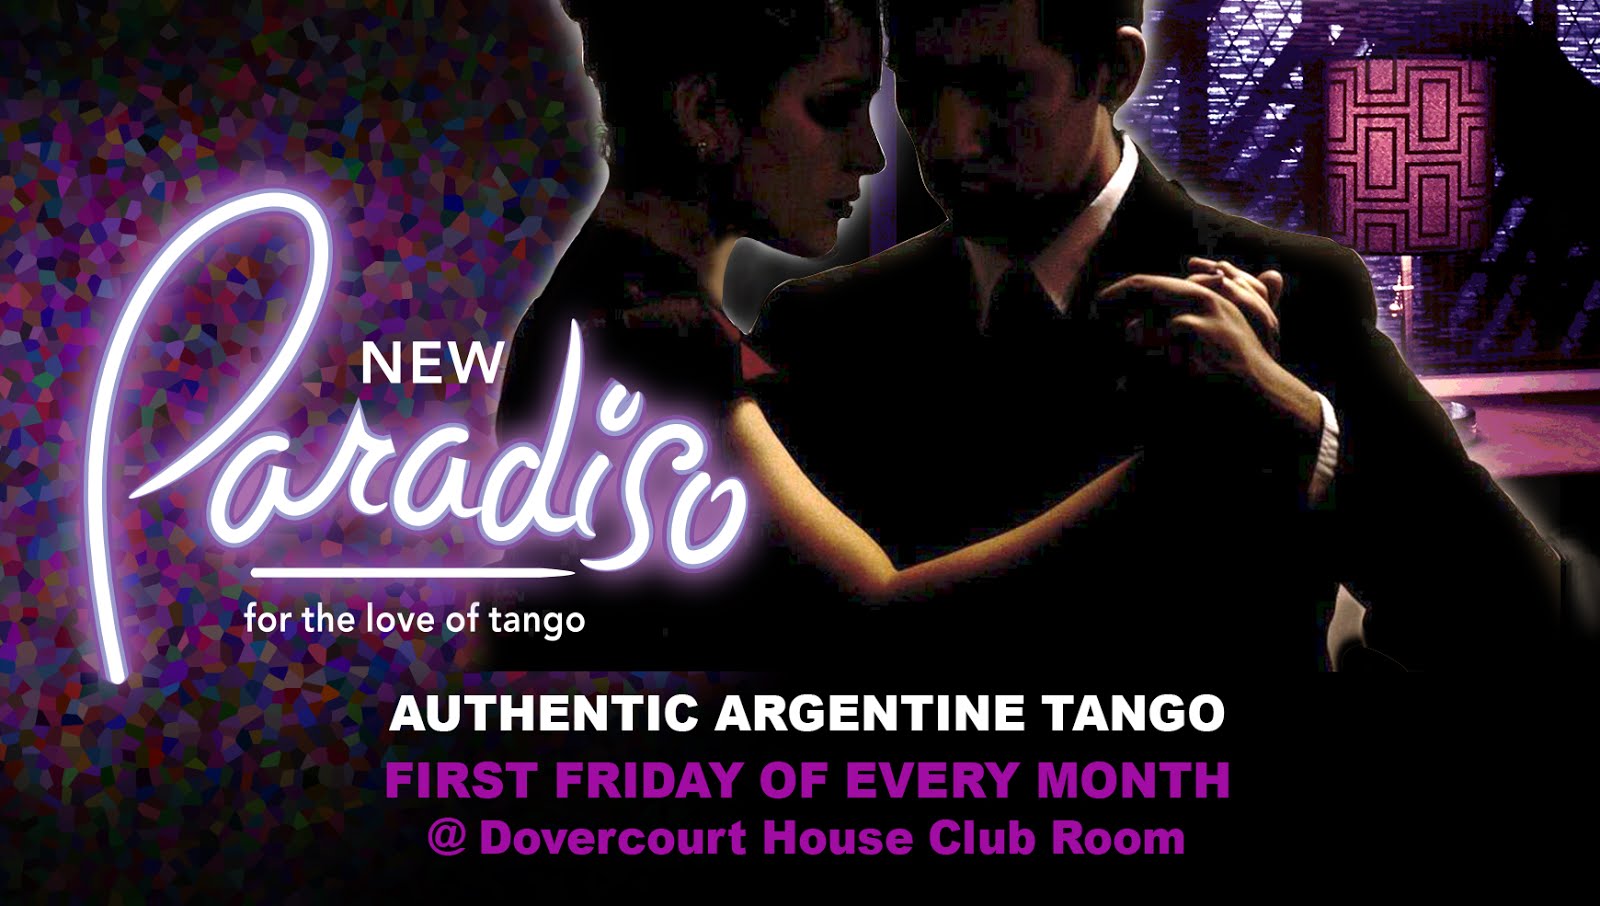 Paradiso"for the love of tango"<br>a Friday evening traditional milonga in its 15th year